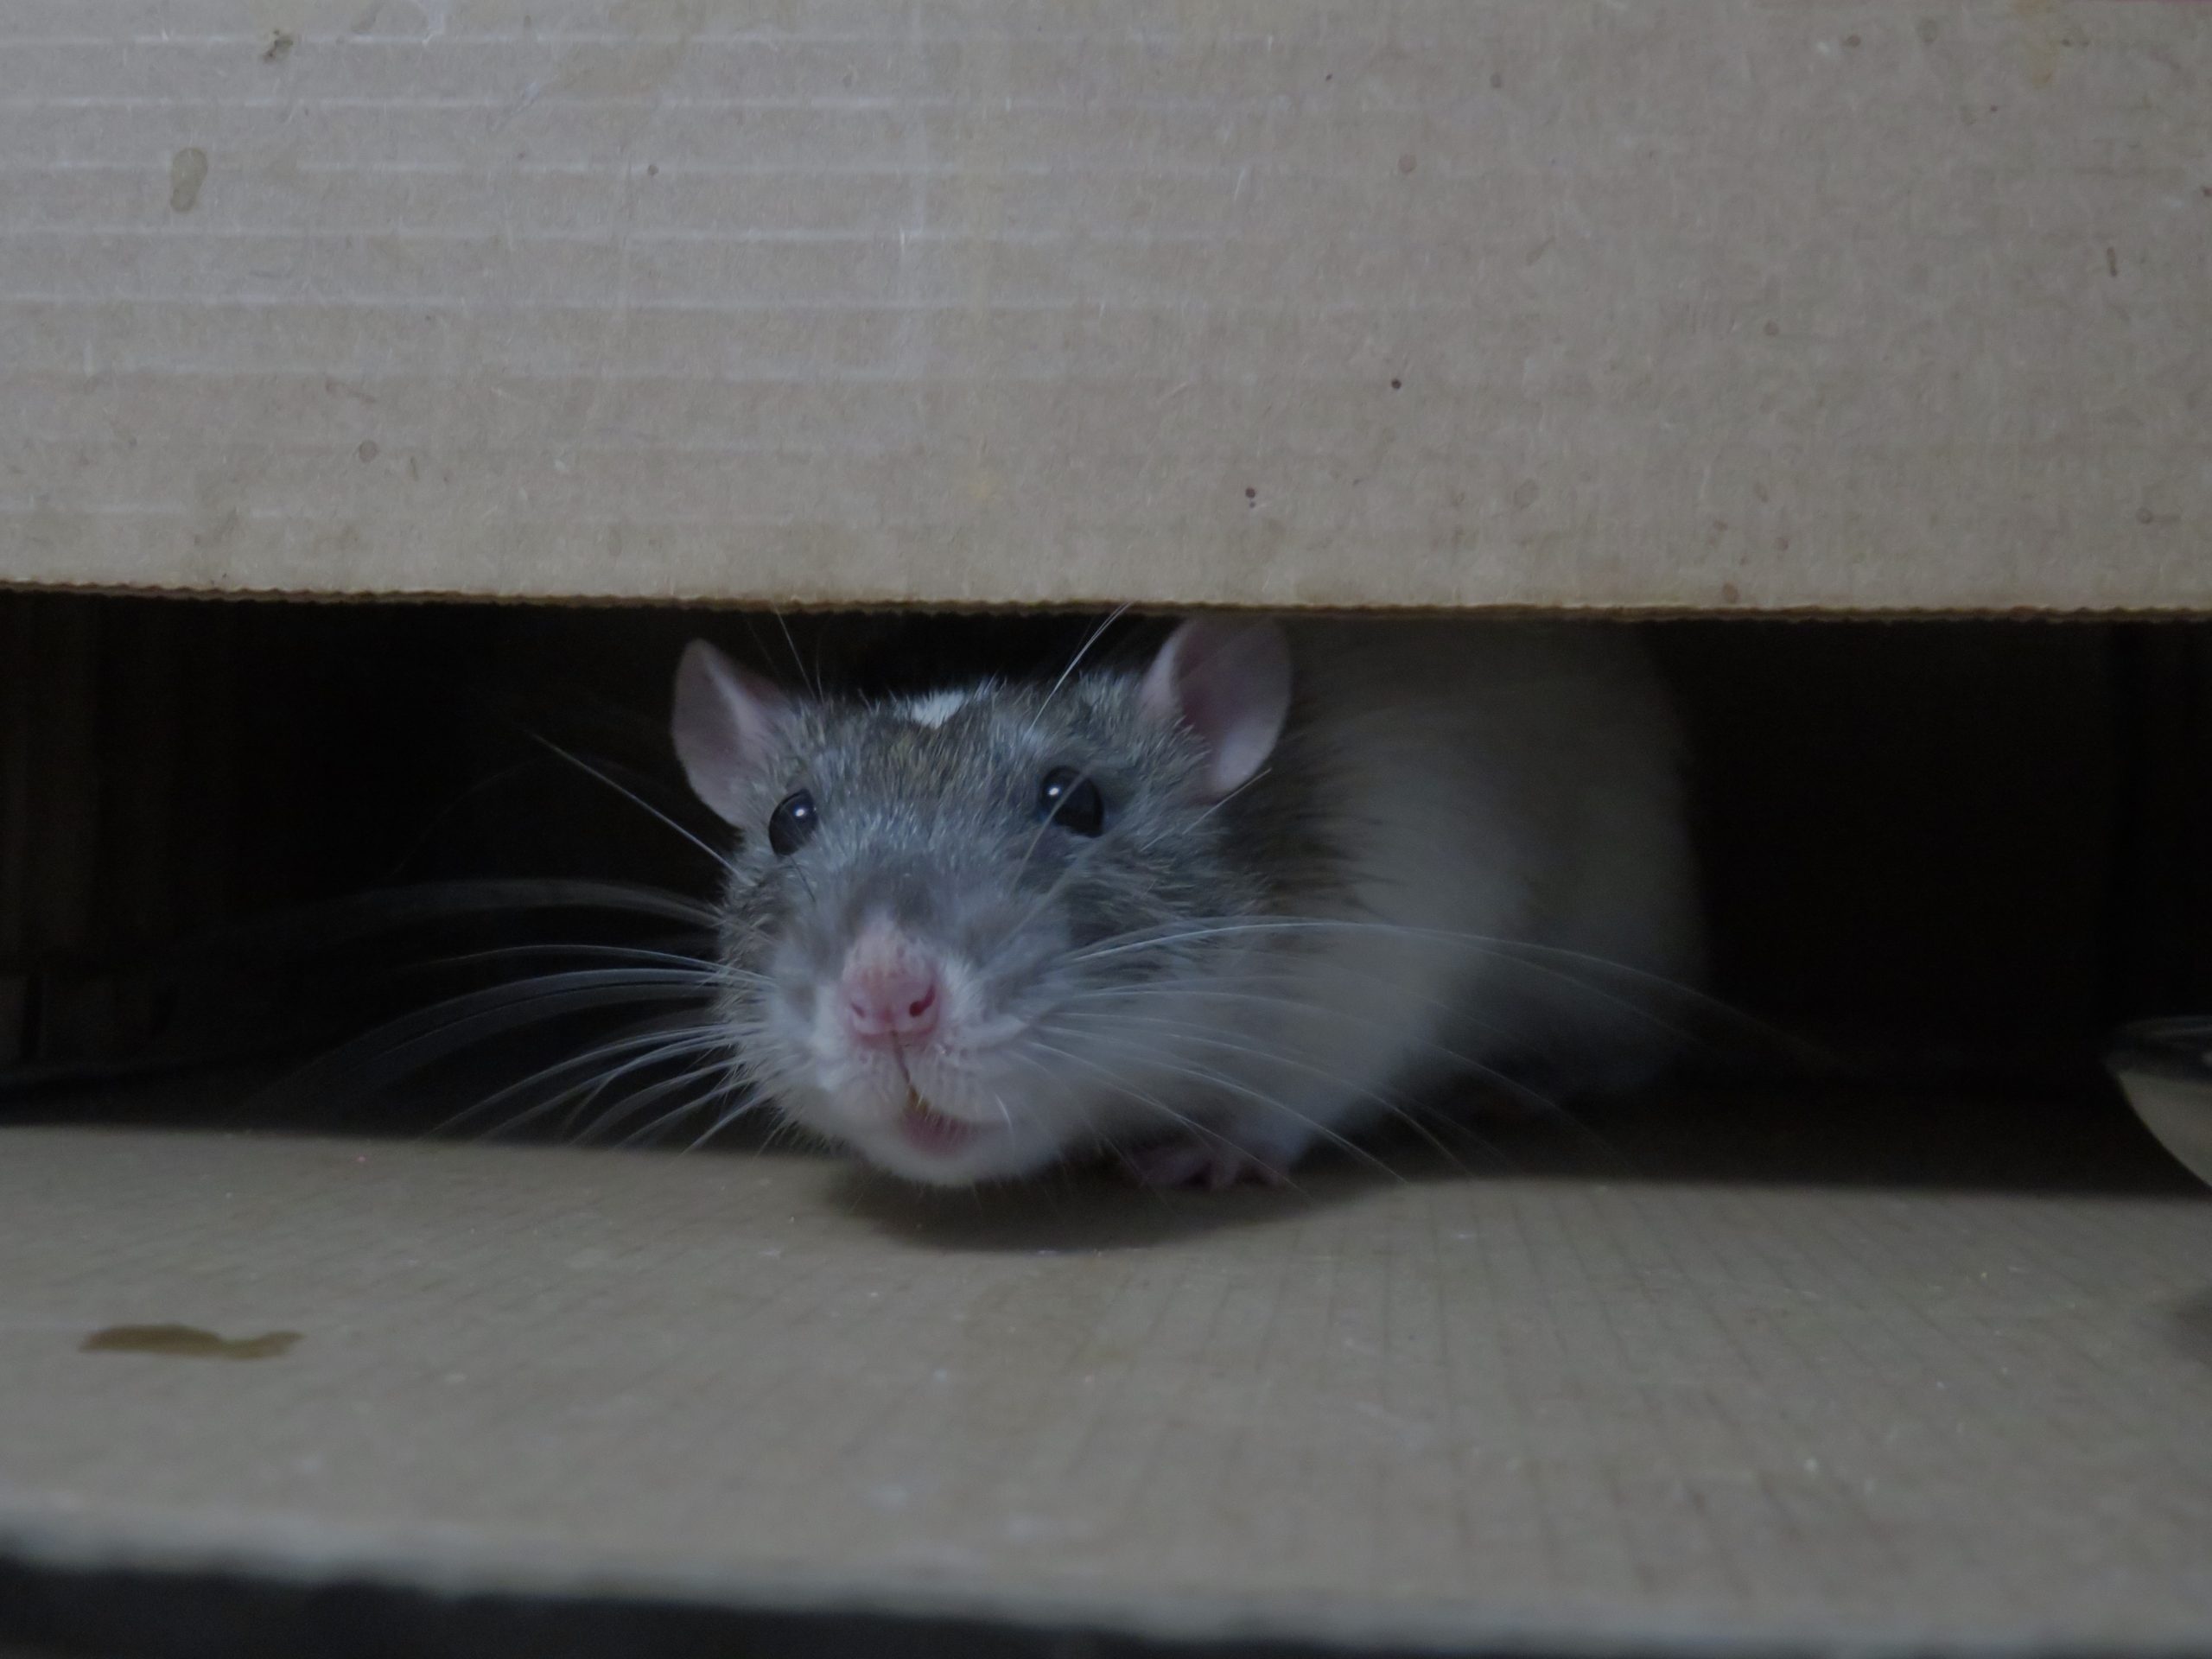 How much does it cost for rat control?